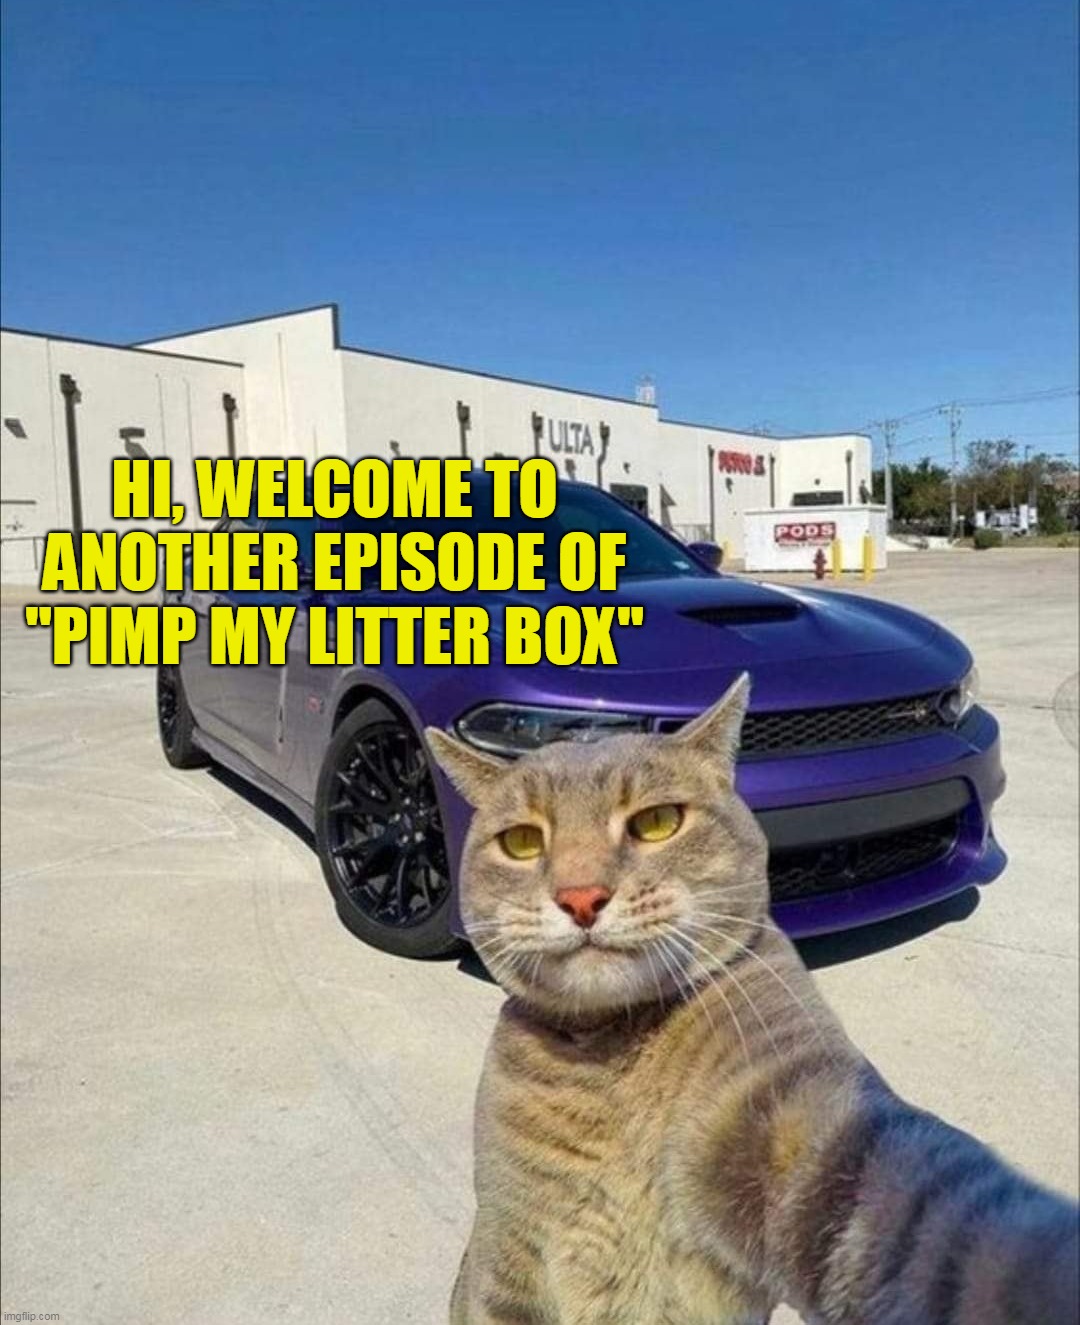 Time to Ride at Dawn! |  HI, WELCOME TO ANOTHER EPISODE OF "PIMP MY LITTER BOX" | image tagged in meme,memes,humor,cat,cats | made w/ Imgflip meme maker